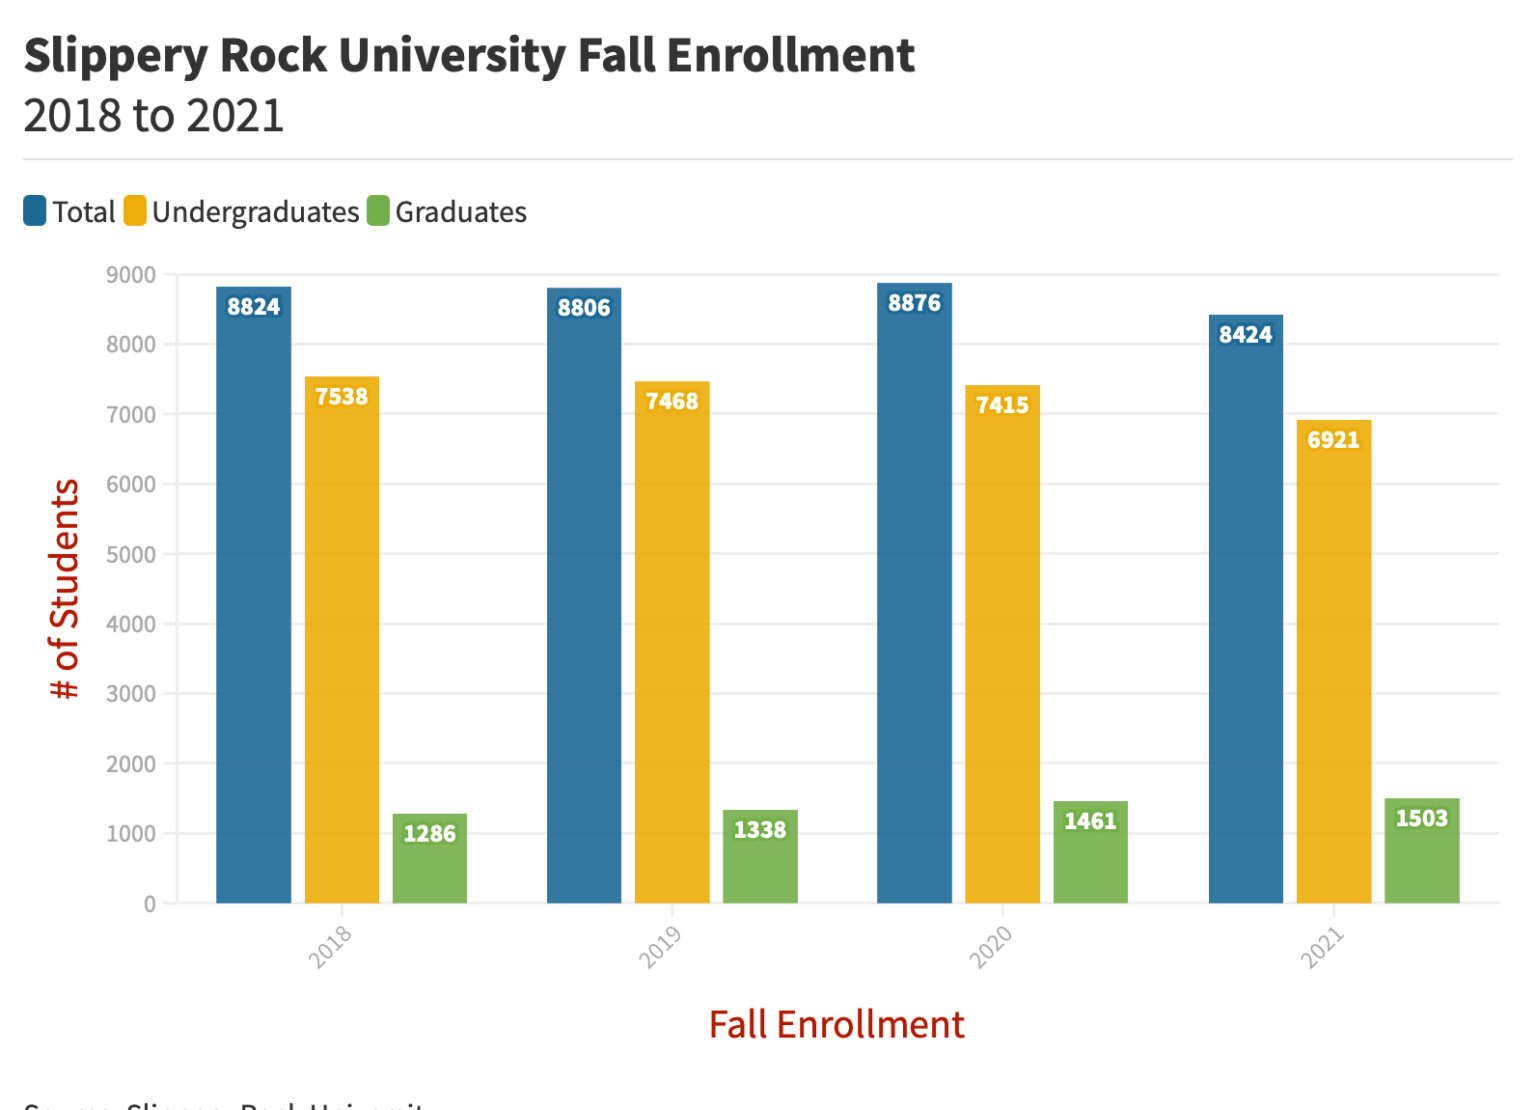 SRU returns with less students - The Rocket